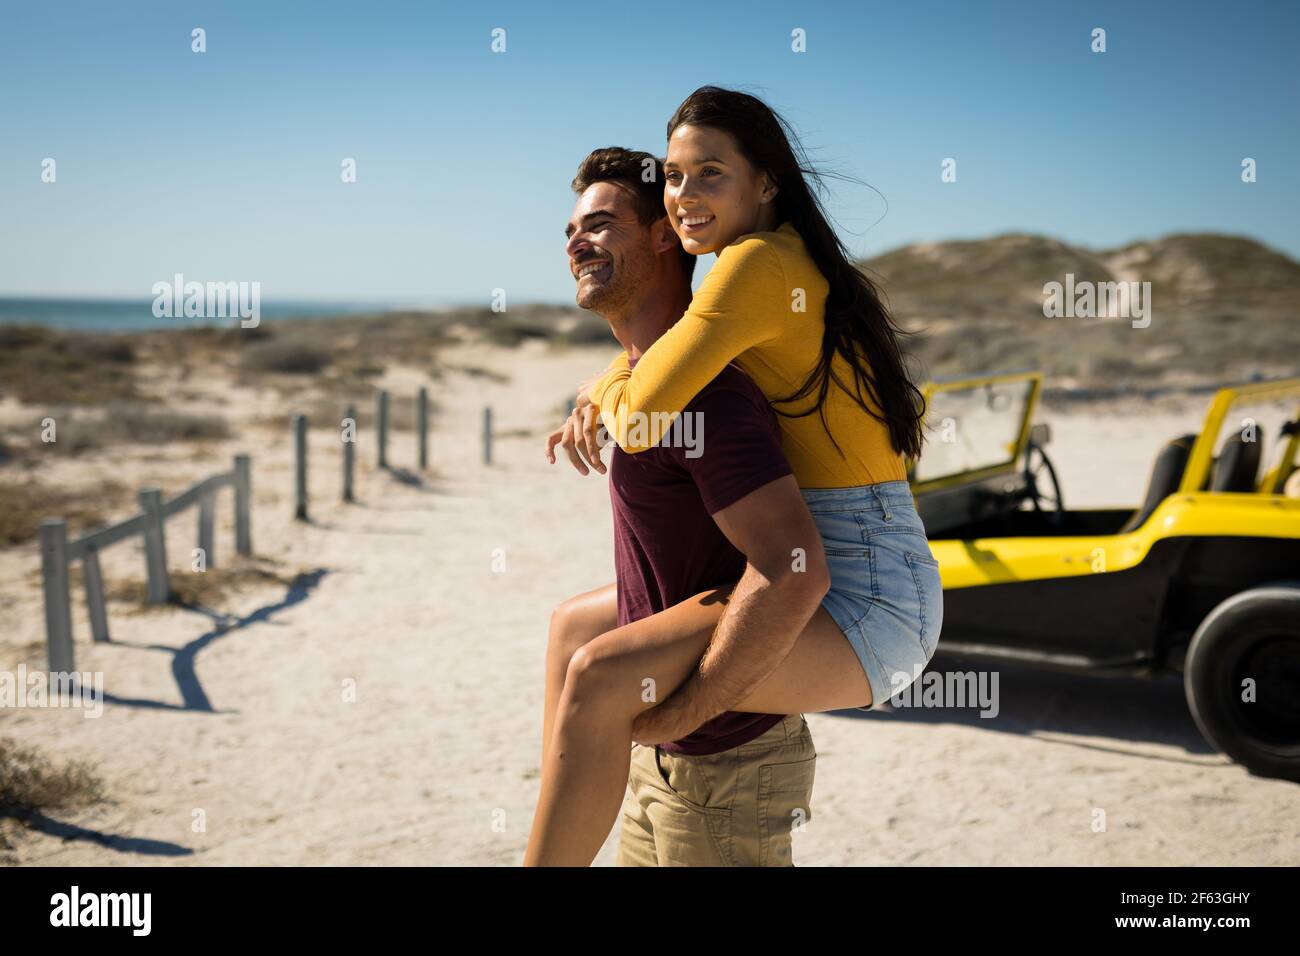 Happy caucasian couple next to beach buggy by the sea piggybacking Stock Photo